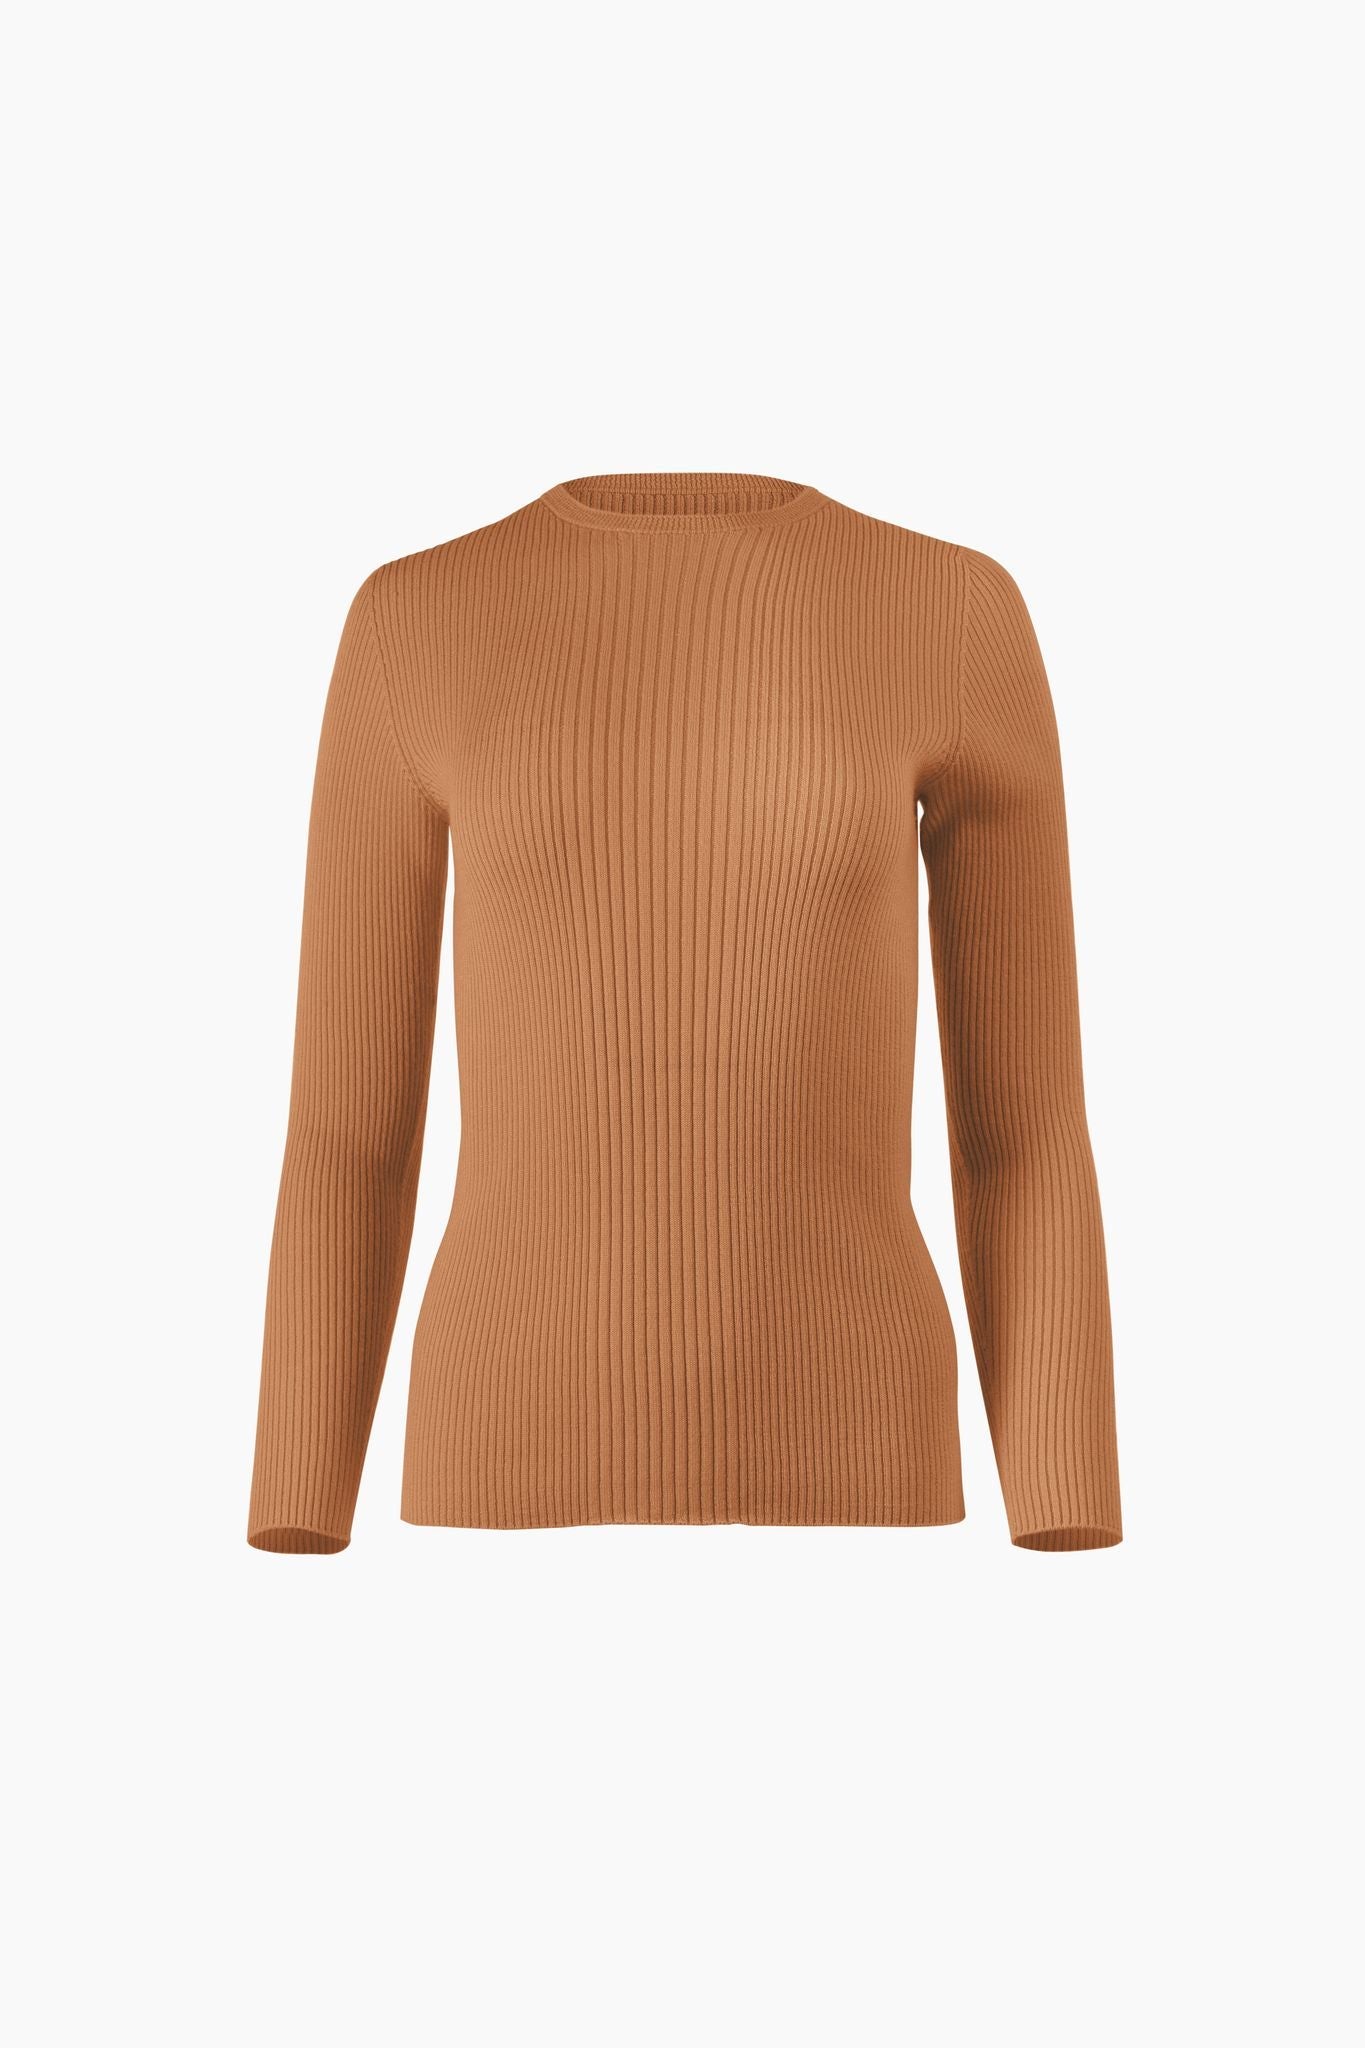 KASS CREW RIBBED PULLOVER - CAMEL